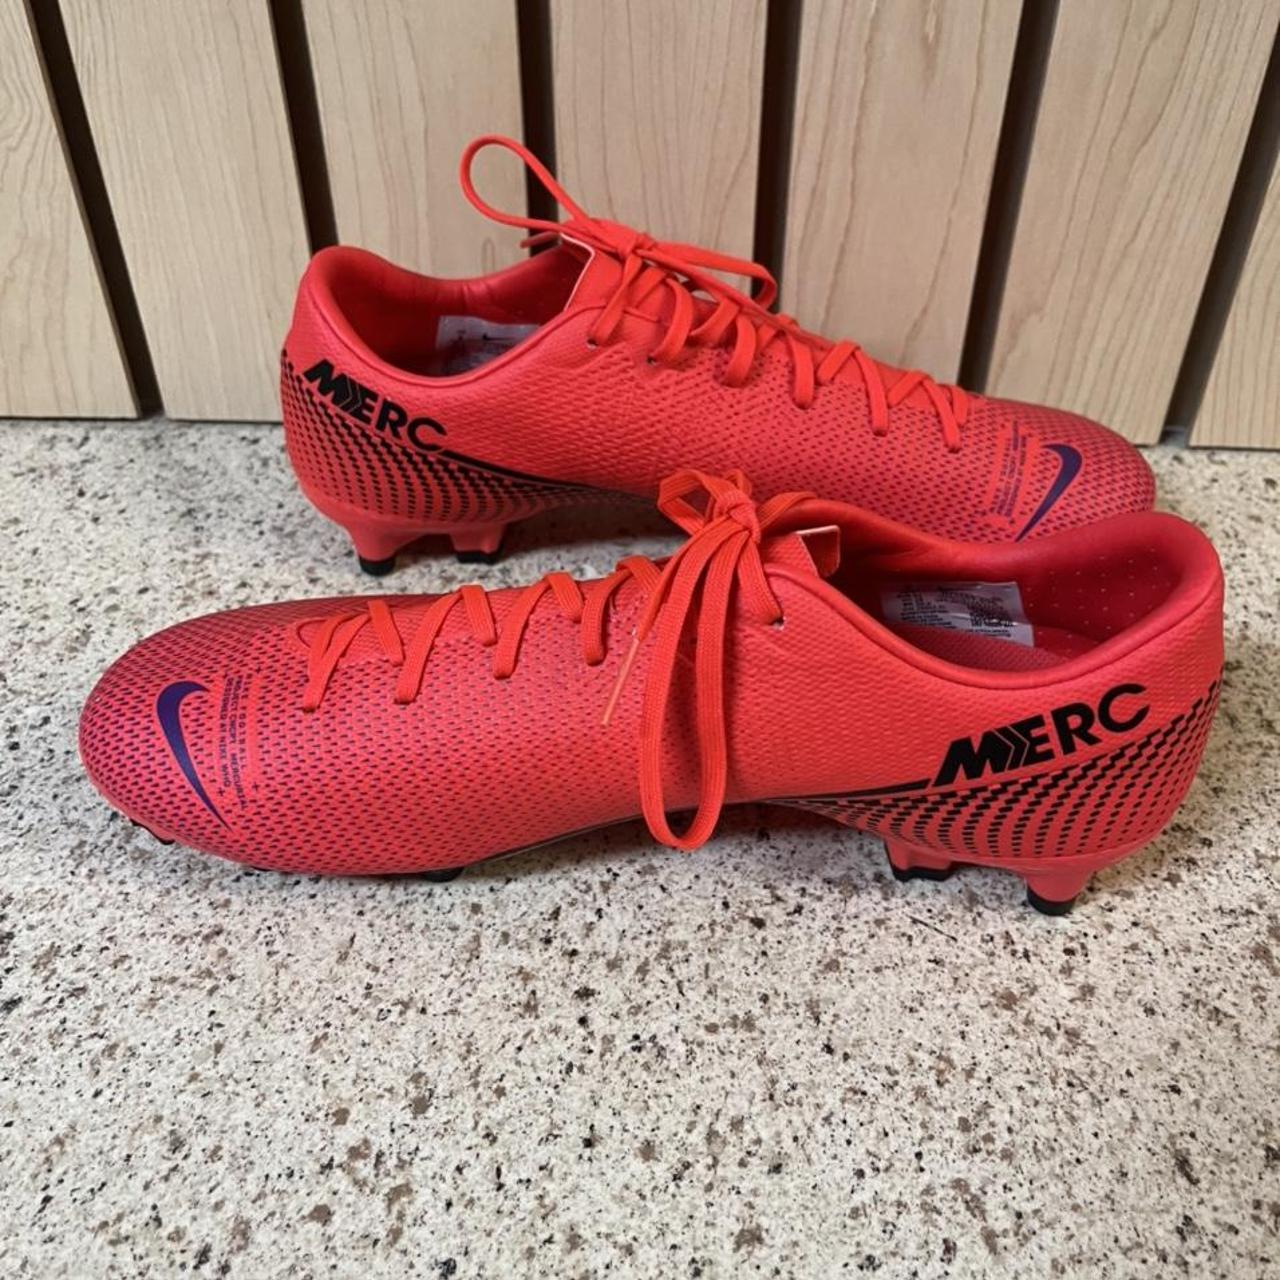 Product Image 4 - Nike Men's Football Boots, Red